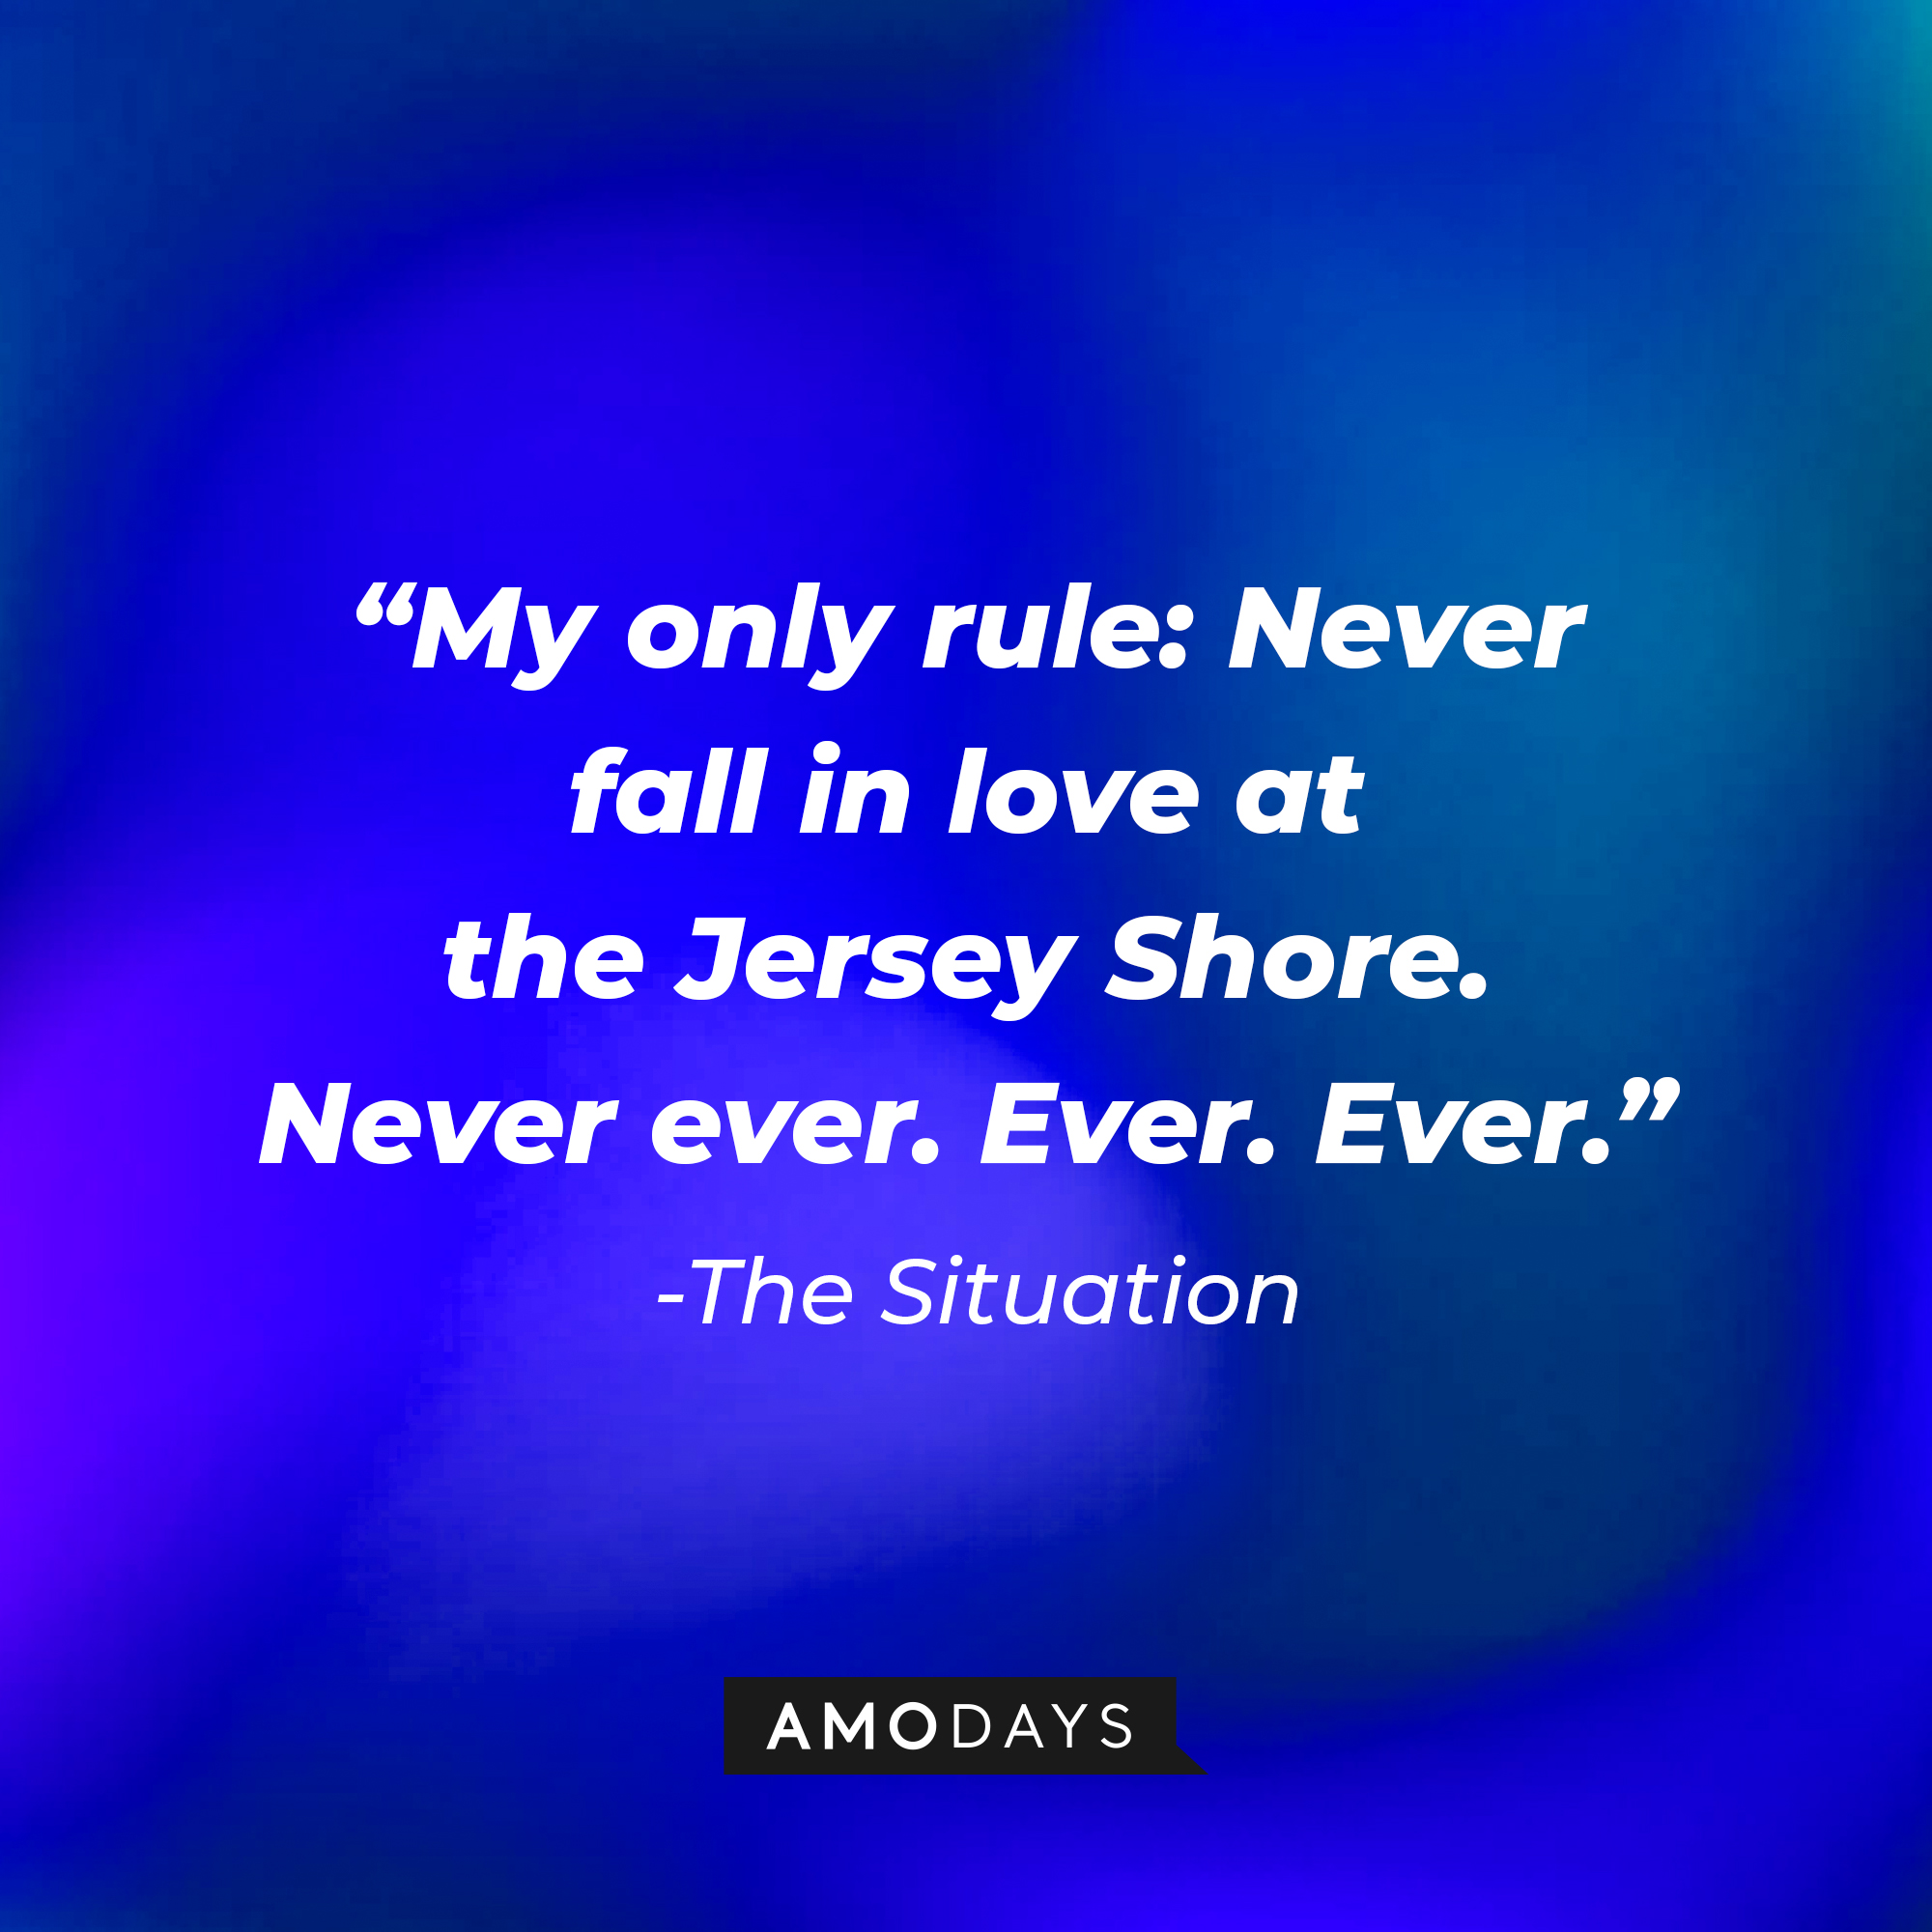 The Situation's quote: "My only rule: Never fall in love at the Jersey Shore. Never ever. Ever. Ever." | Source: youtube.com/jerseyshore